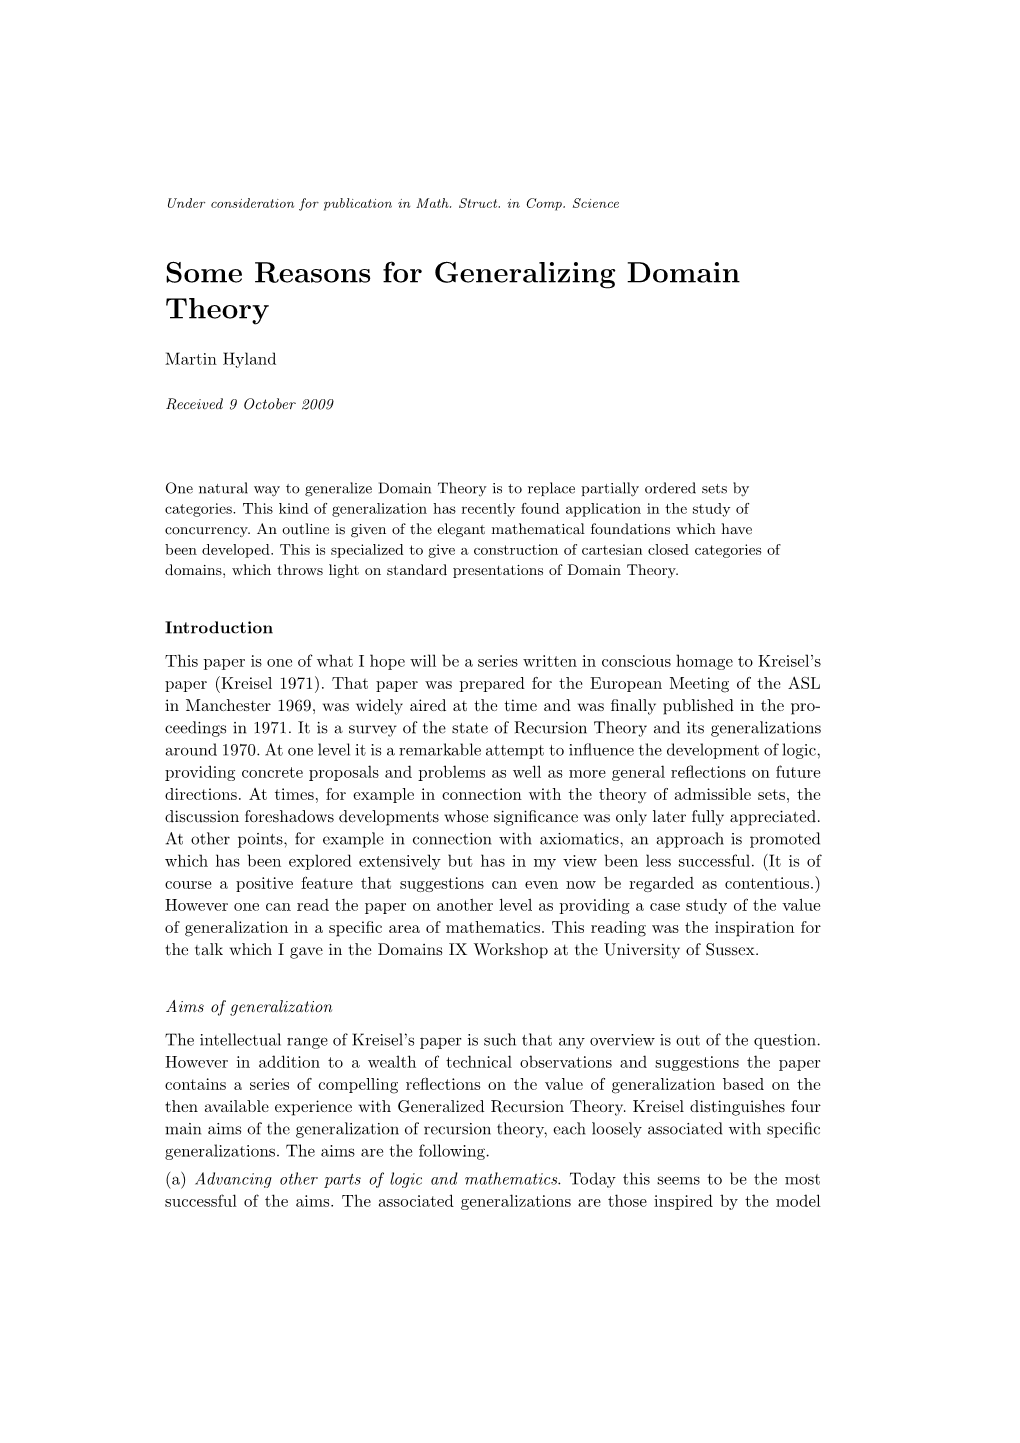 Some Reasons for Generalizing Domain Theory